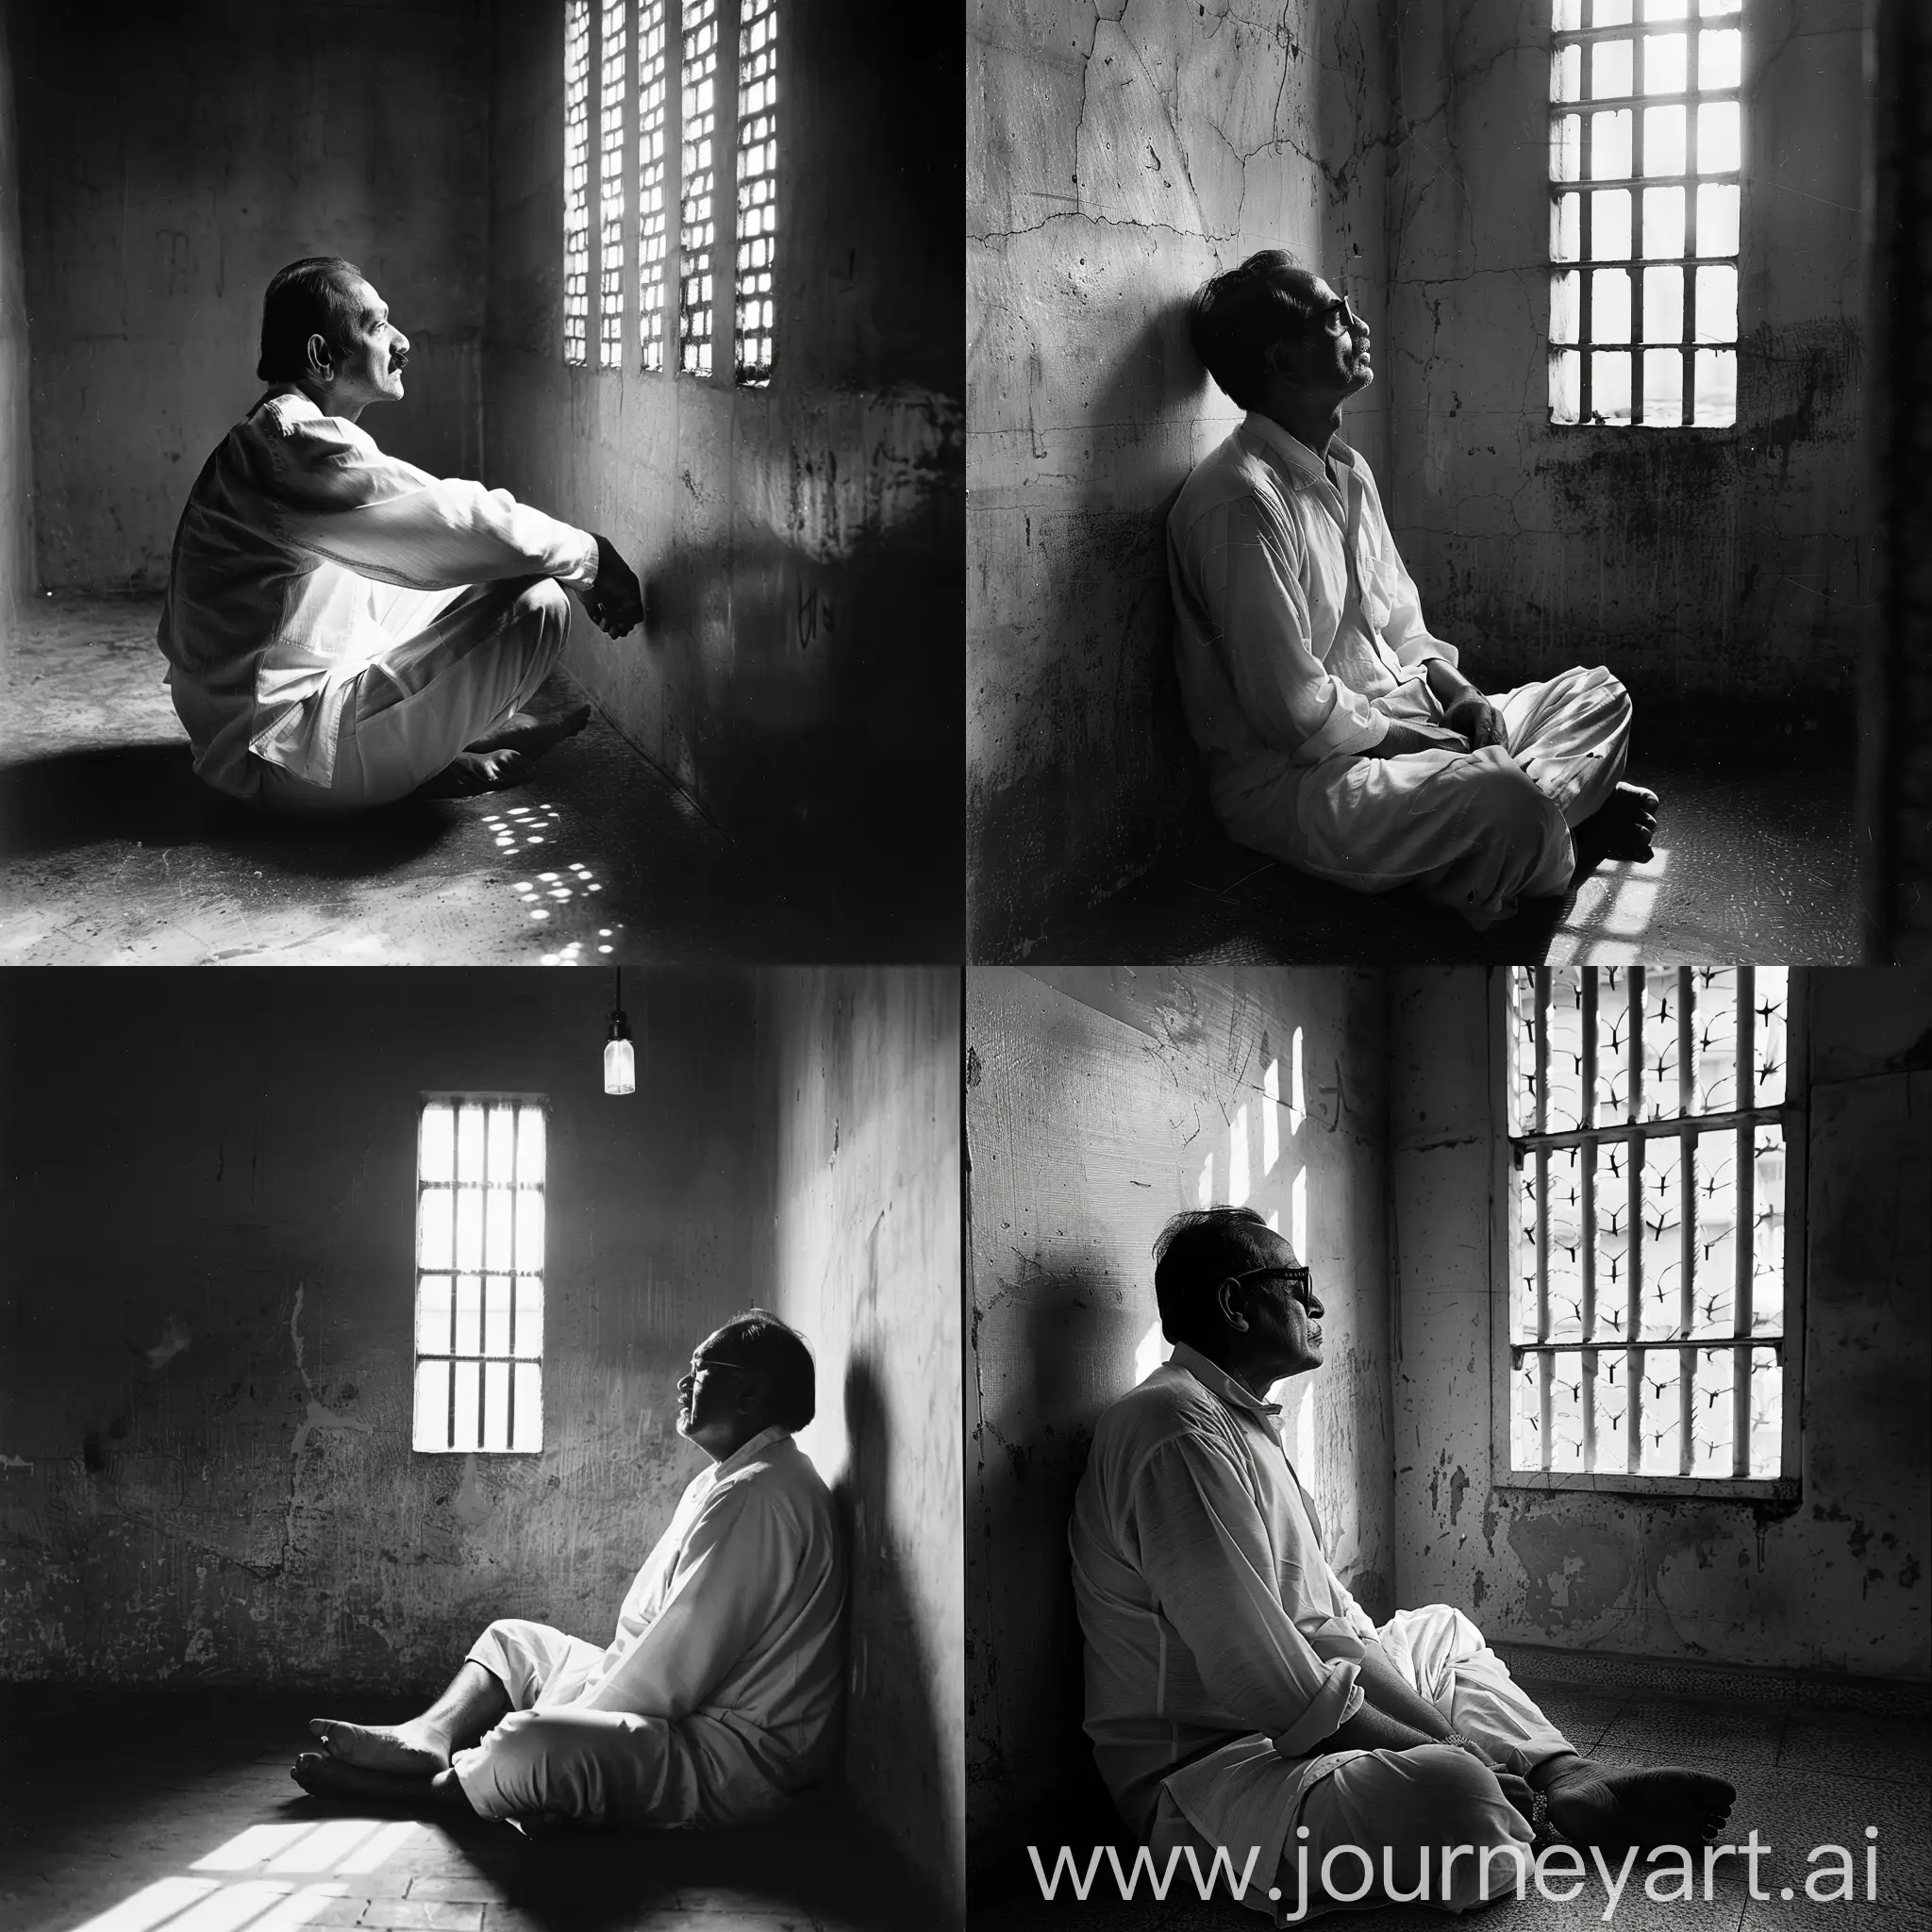 Bangabandhu Sheikh Mujibur Rahman in the jail, sitting on the floor looking out the small window on the wall devastatingly as the sunlight comes in